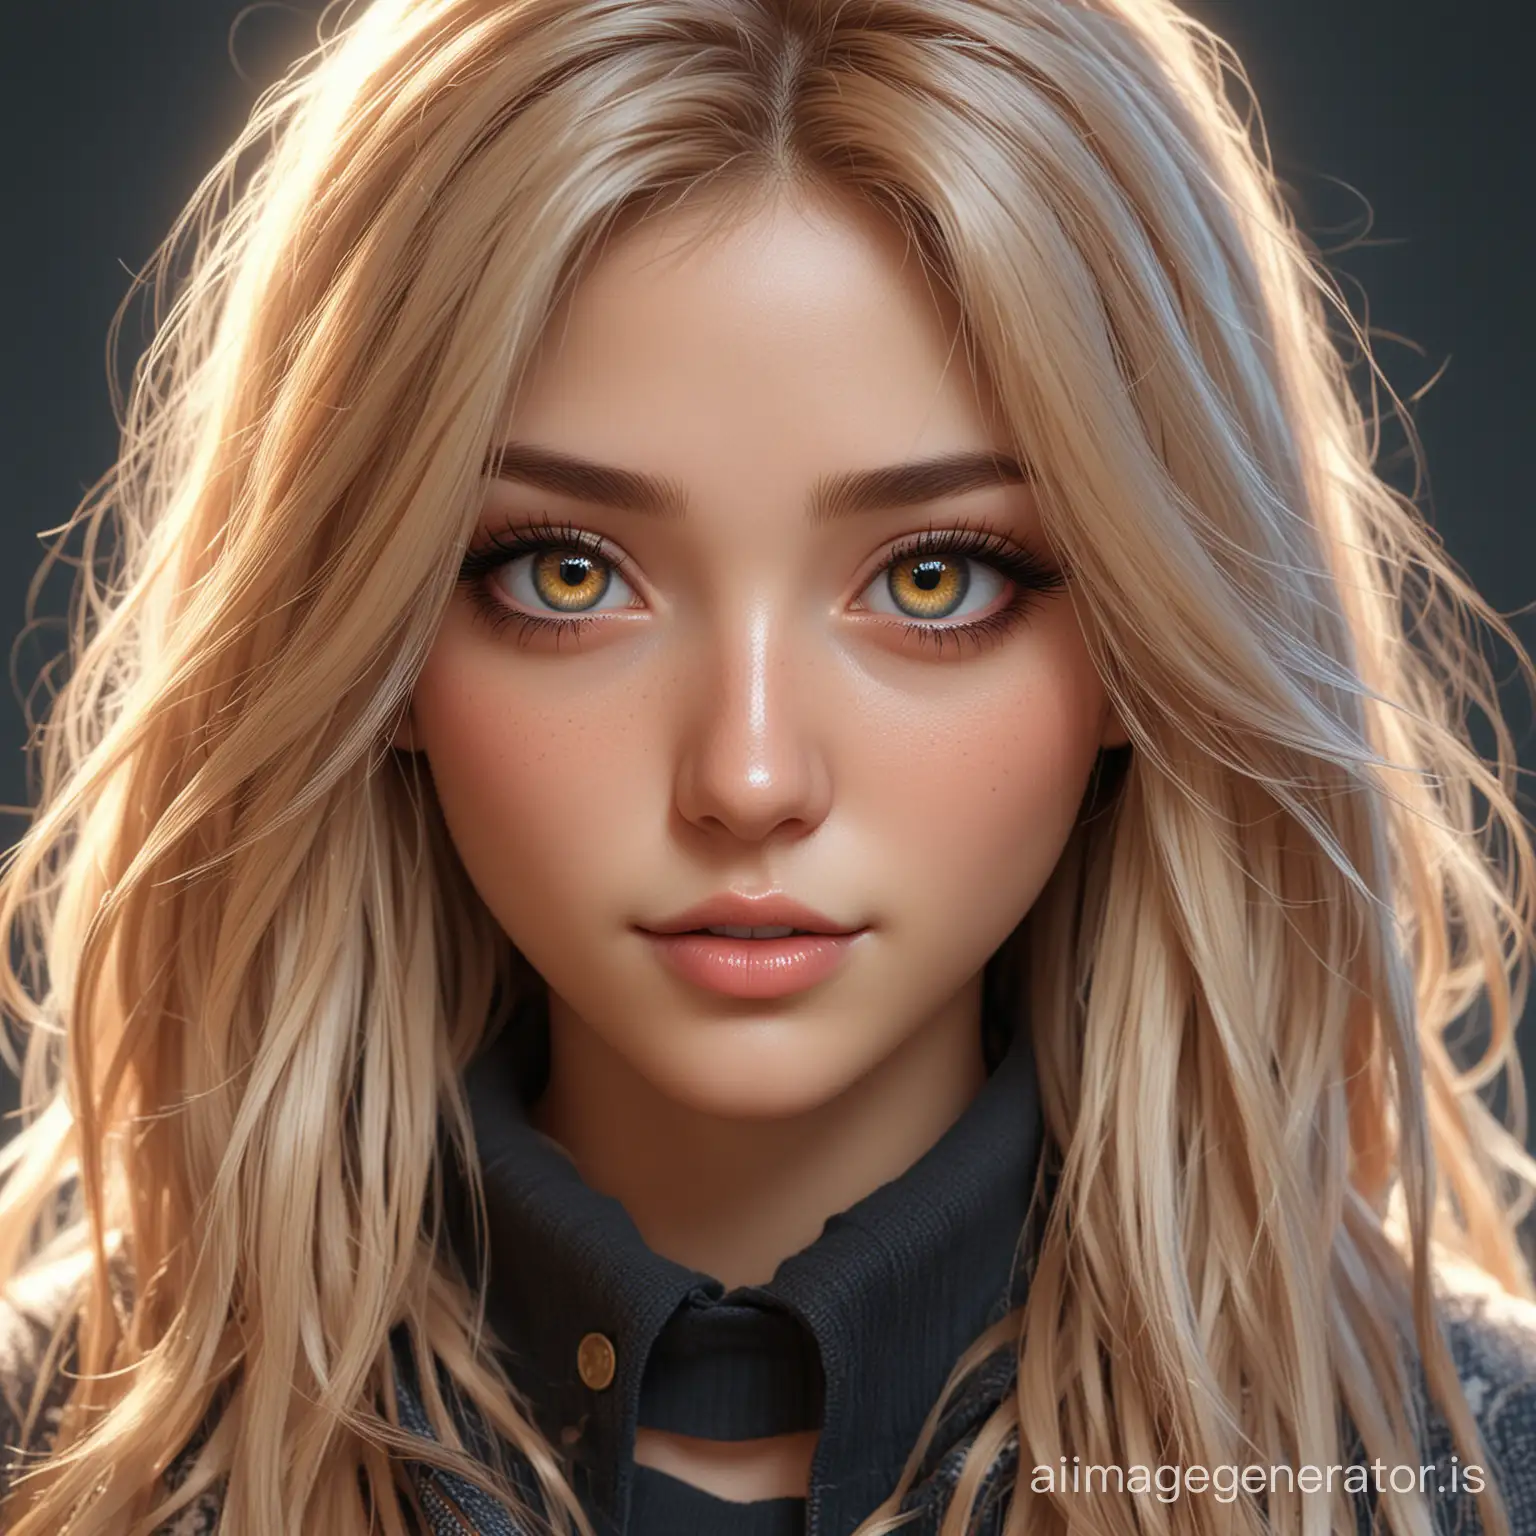 Hyperrealistic-Digital-Painting-Stunning-Portrait-with-Intricate-Details